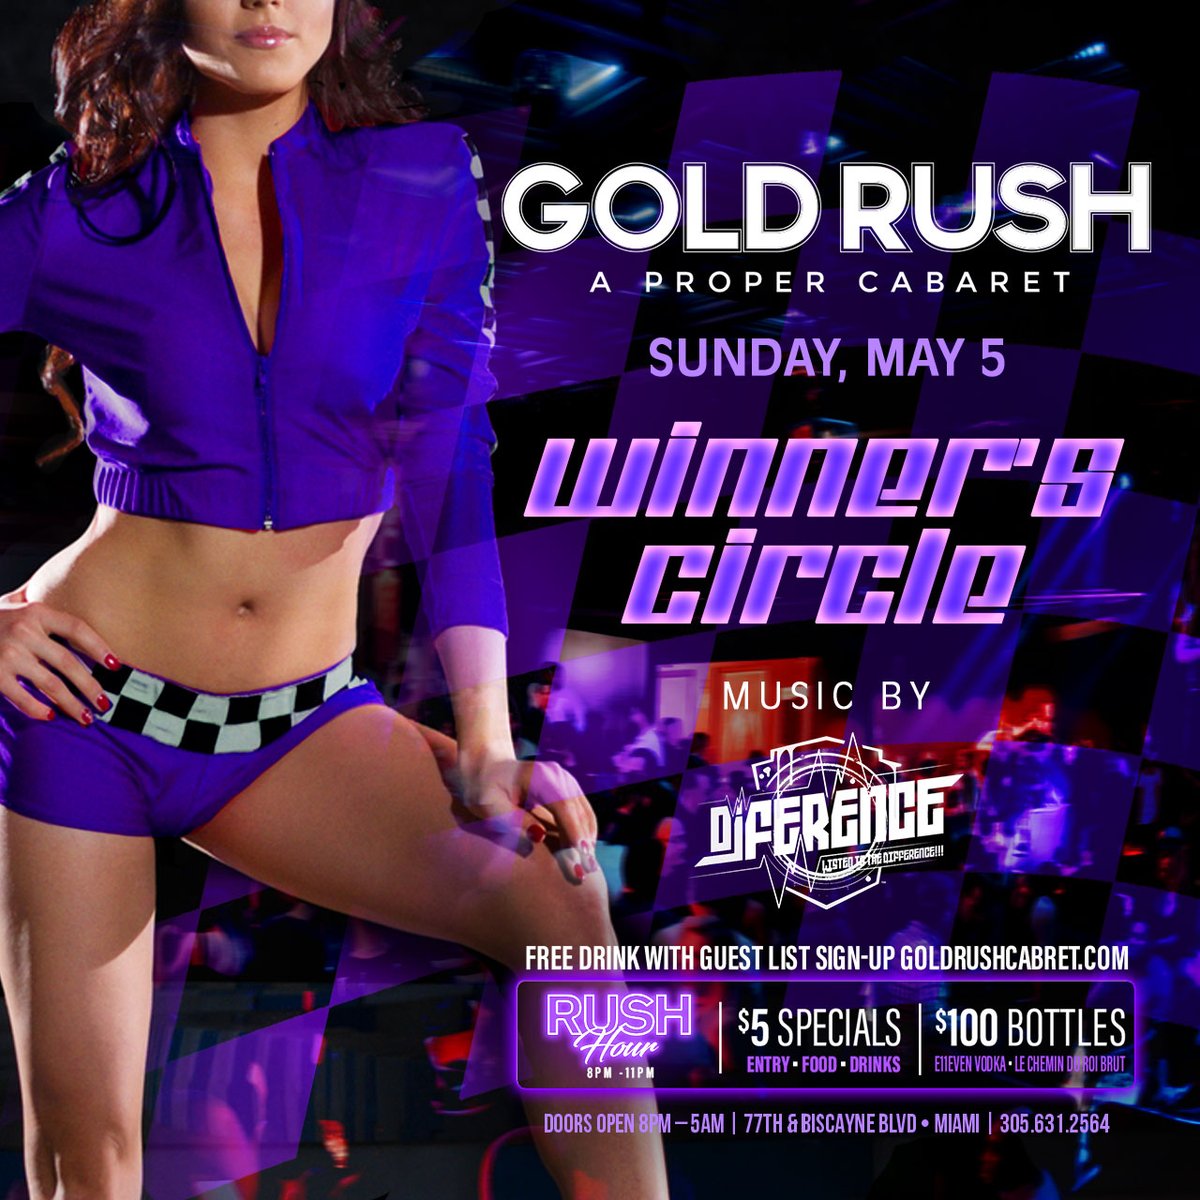 Can't help to #FeelTheRush during Race Week at #GoldRushMiami 🔥

Winner's Circle | Sunday, May 5
Sounds by @djference 

Free Drink w/ Guest List: GoldRushCabaret.com 

#MiamiRaceWeek